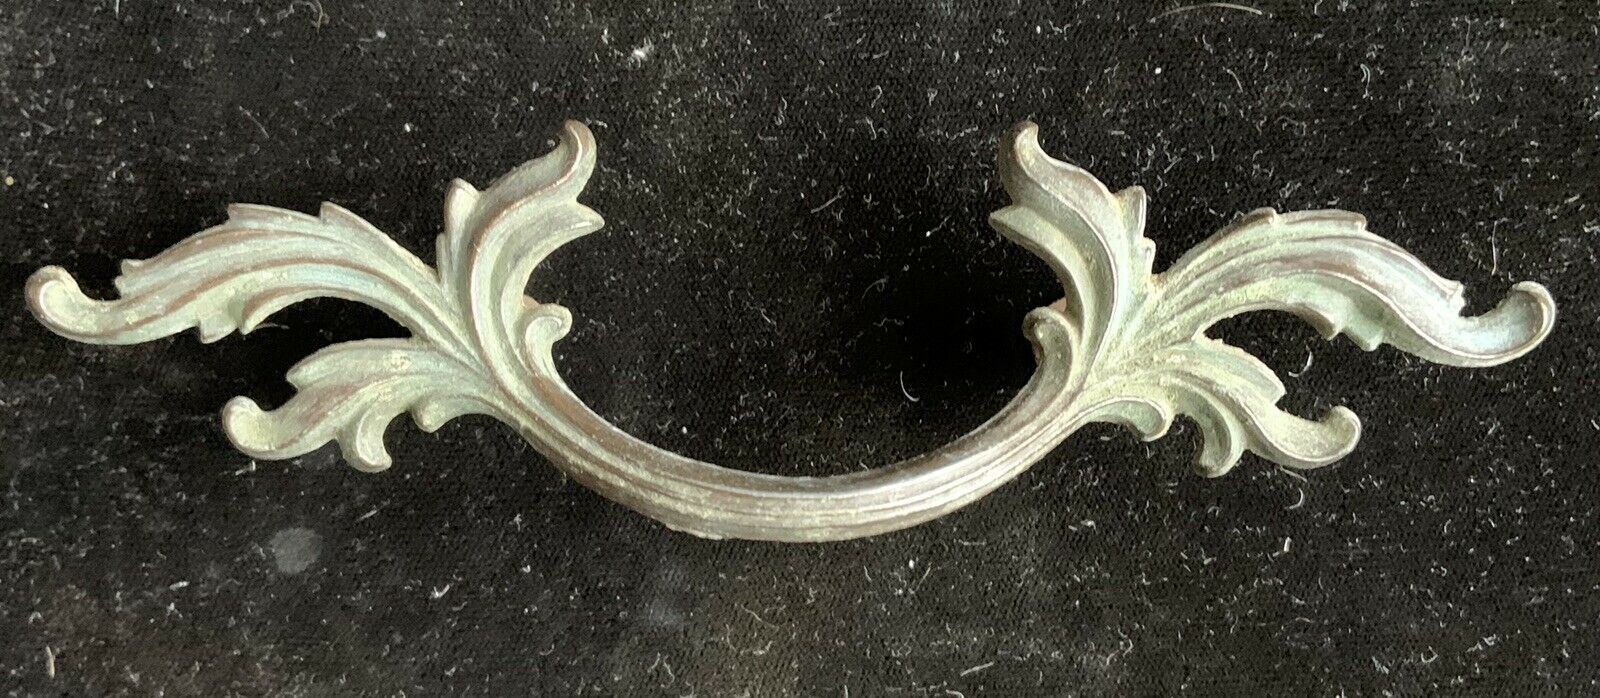 (1) One Solid Brass French Provincial Drawer Pull 2 1/2" Center To Center